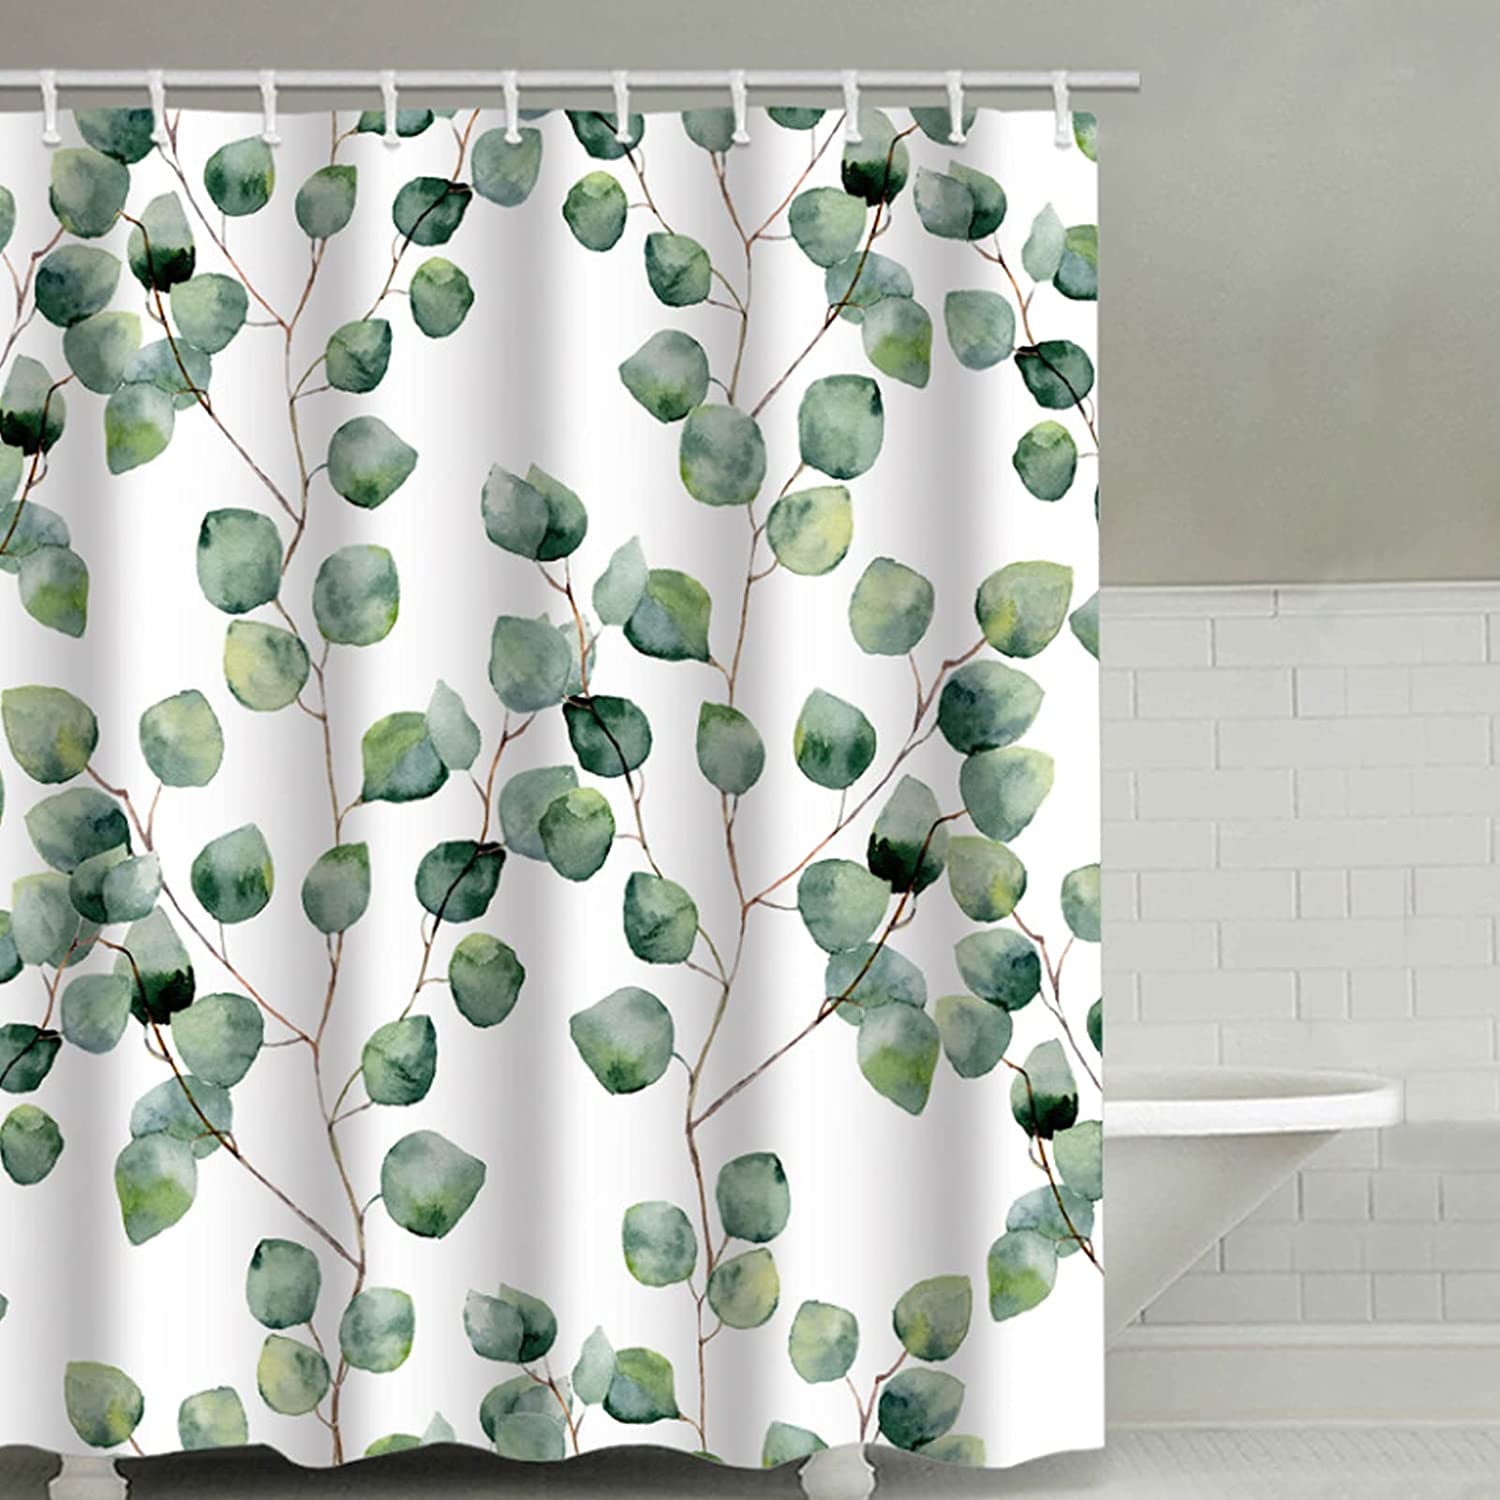 Shower Curtain Weighted Hem Anti, How To Make A Weighted Shower Curtain